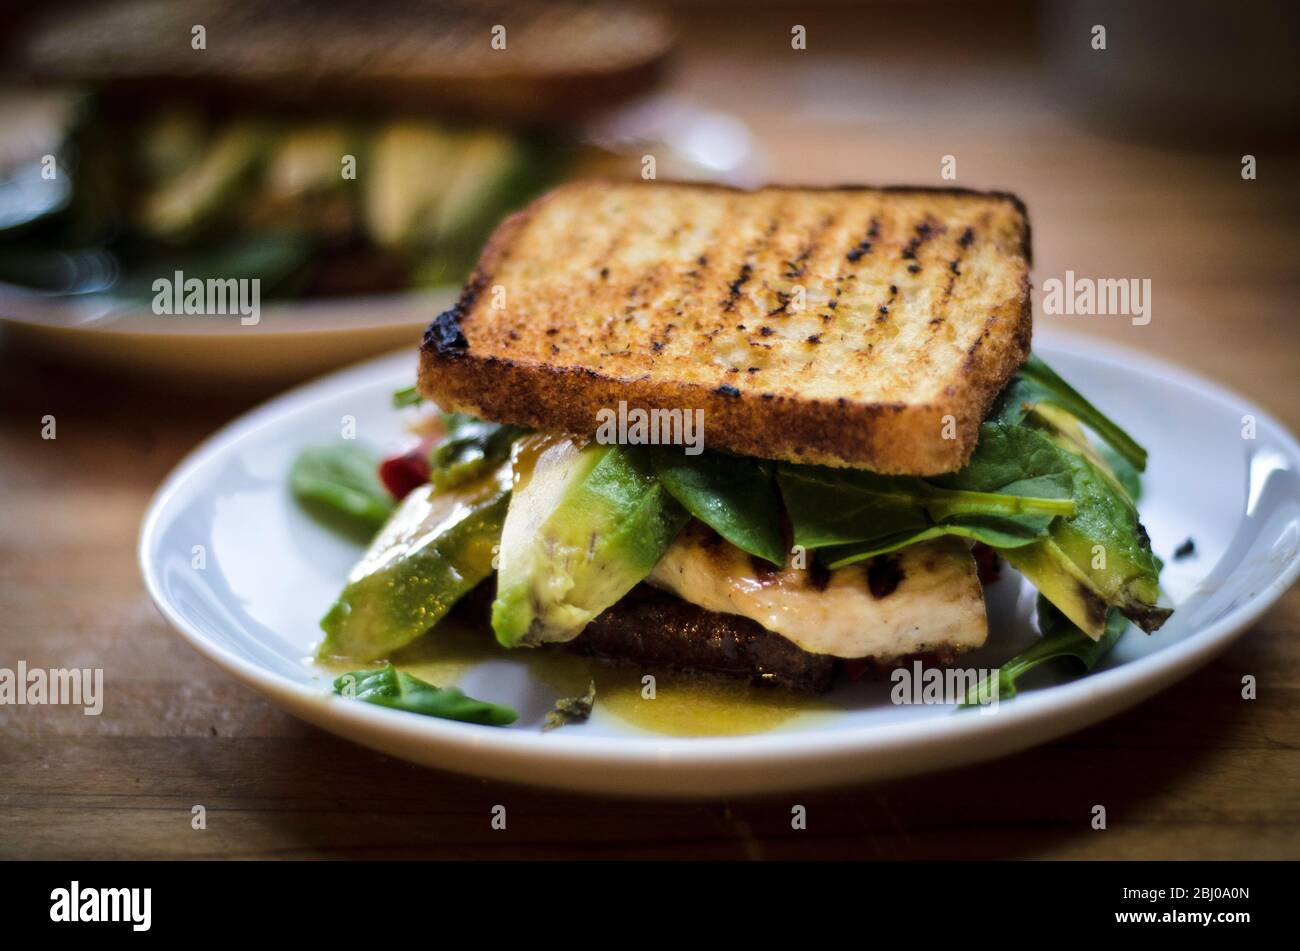 Grilled gluten free bread used to make a sandwich of griddled chicken fillet, avocado slices, spinach, red pepper with vinaigrette. Stock Photo